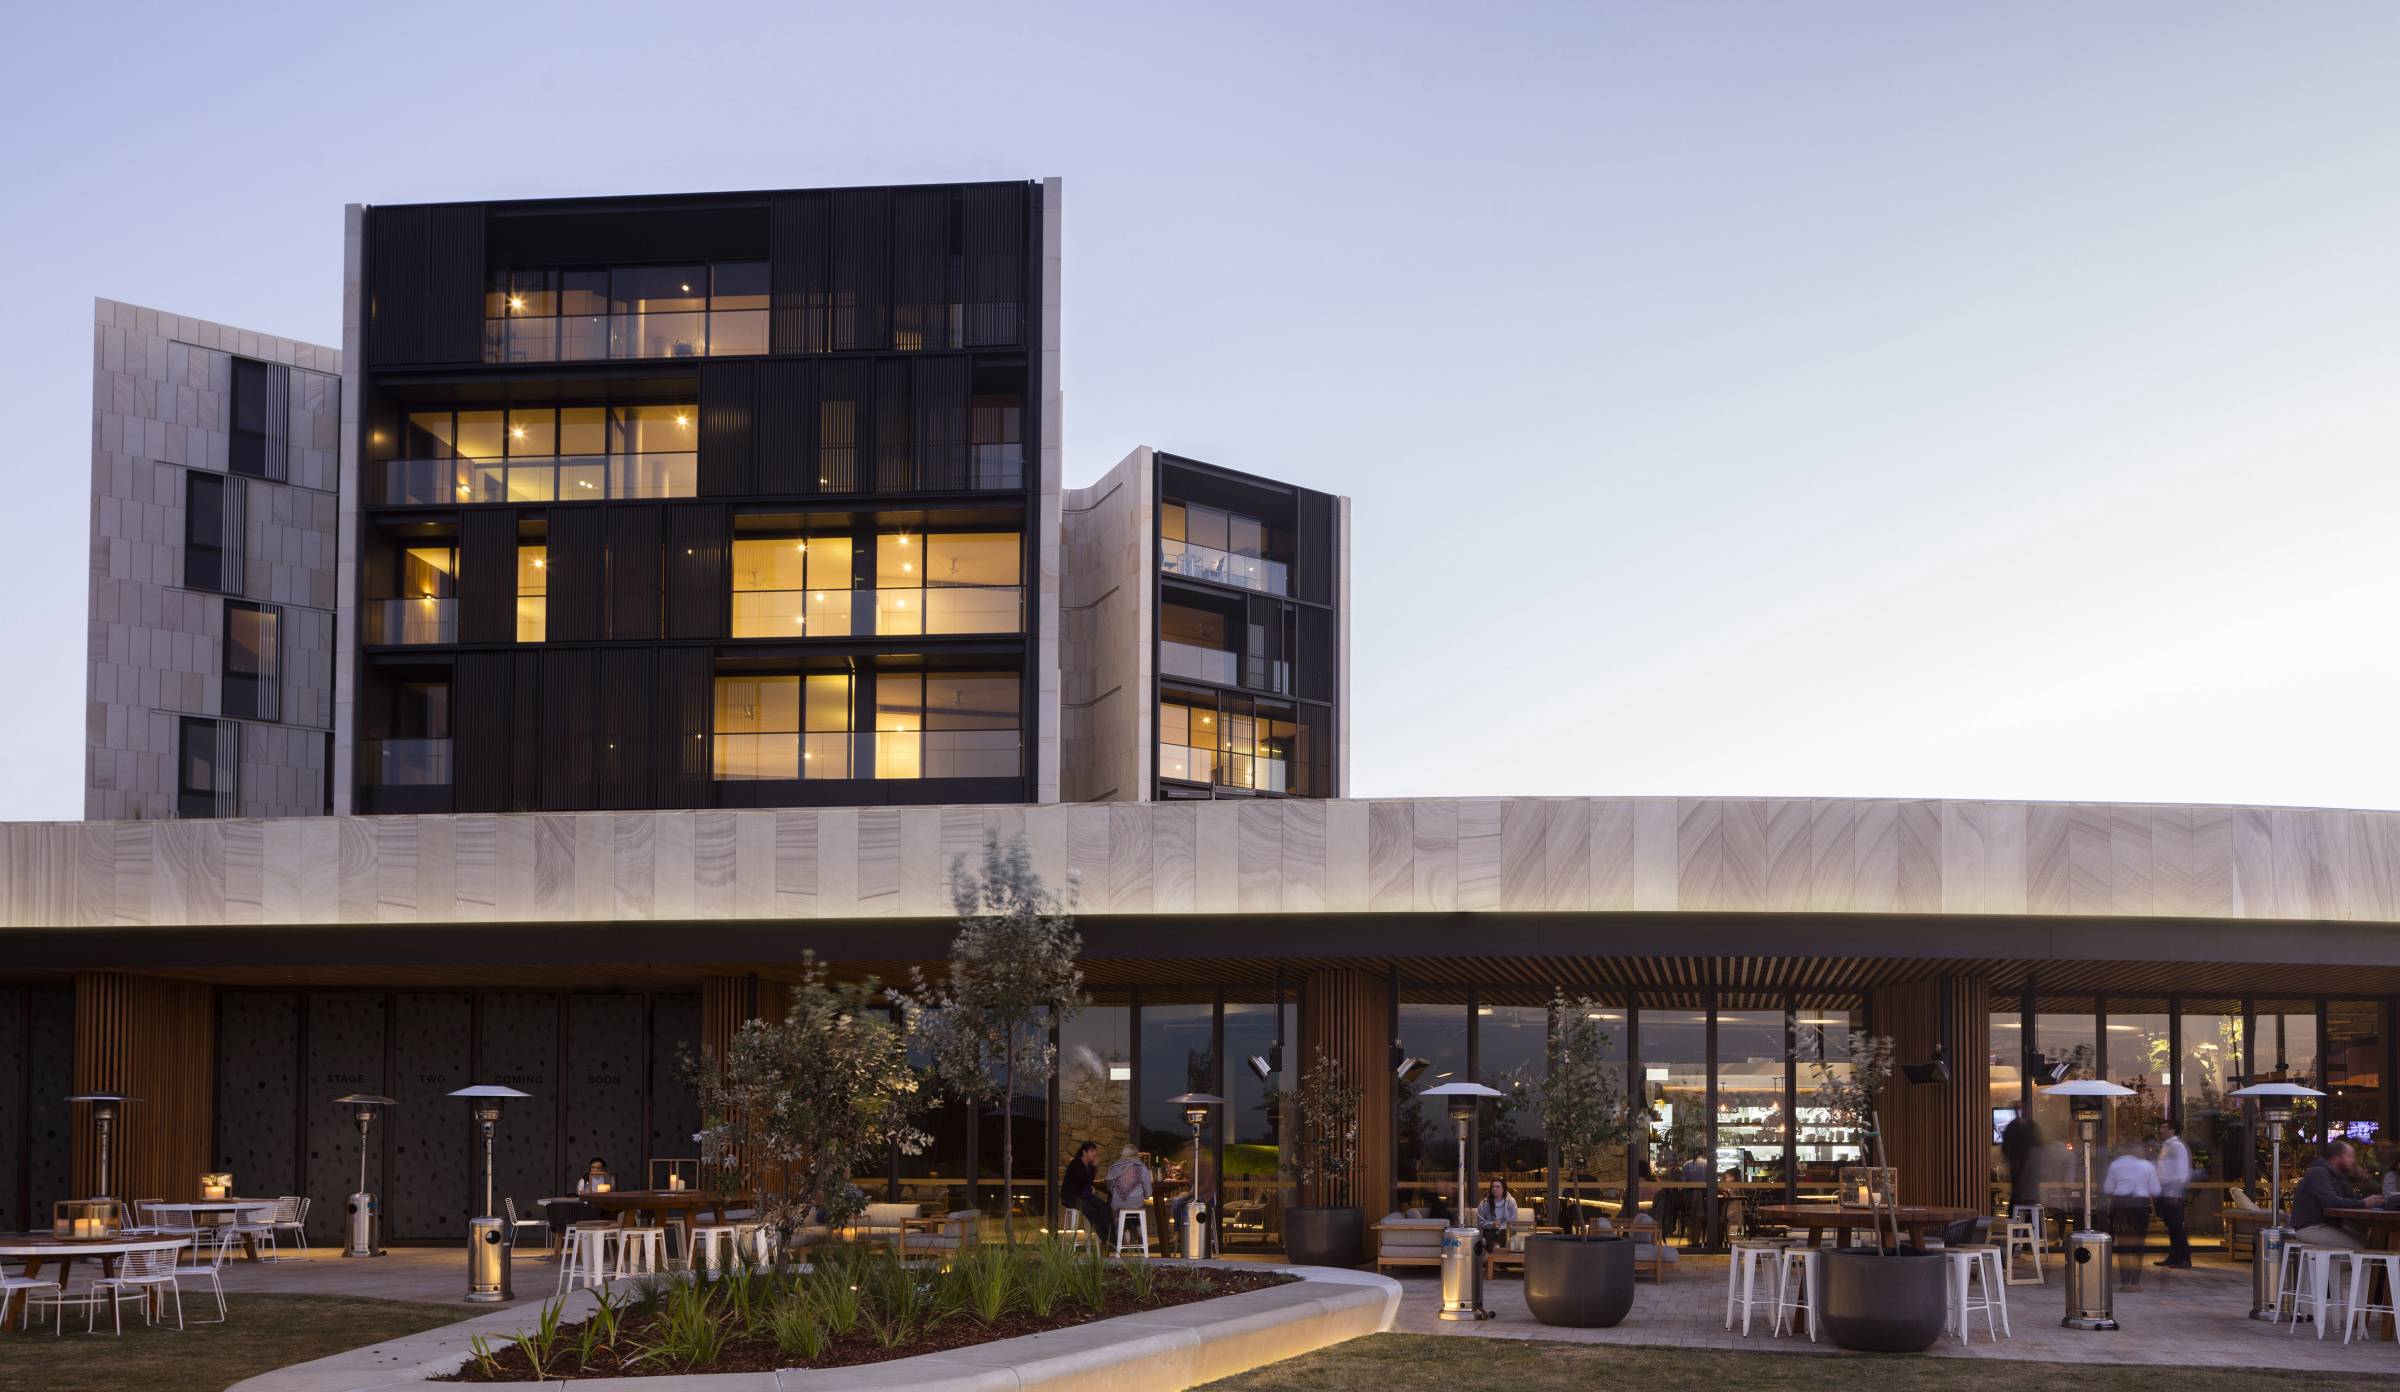 The Harbord Diggers Club has won the 2018 The Urban Developer, Mixed Use Development of the Year Award